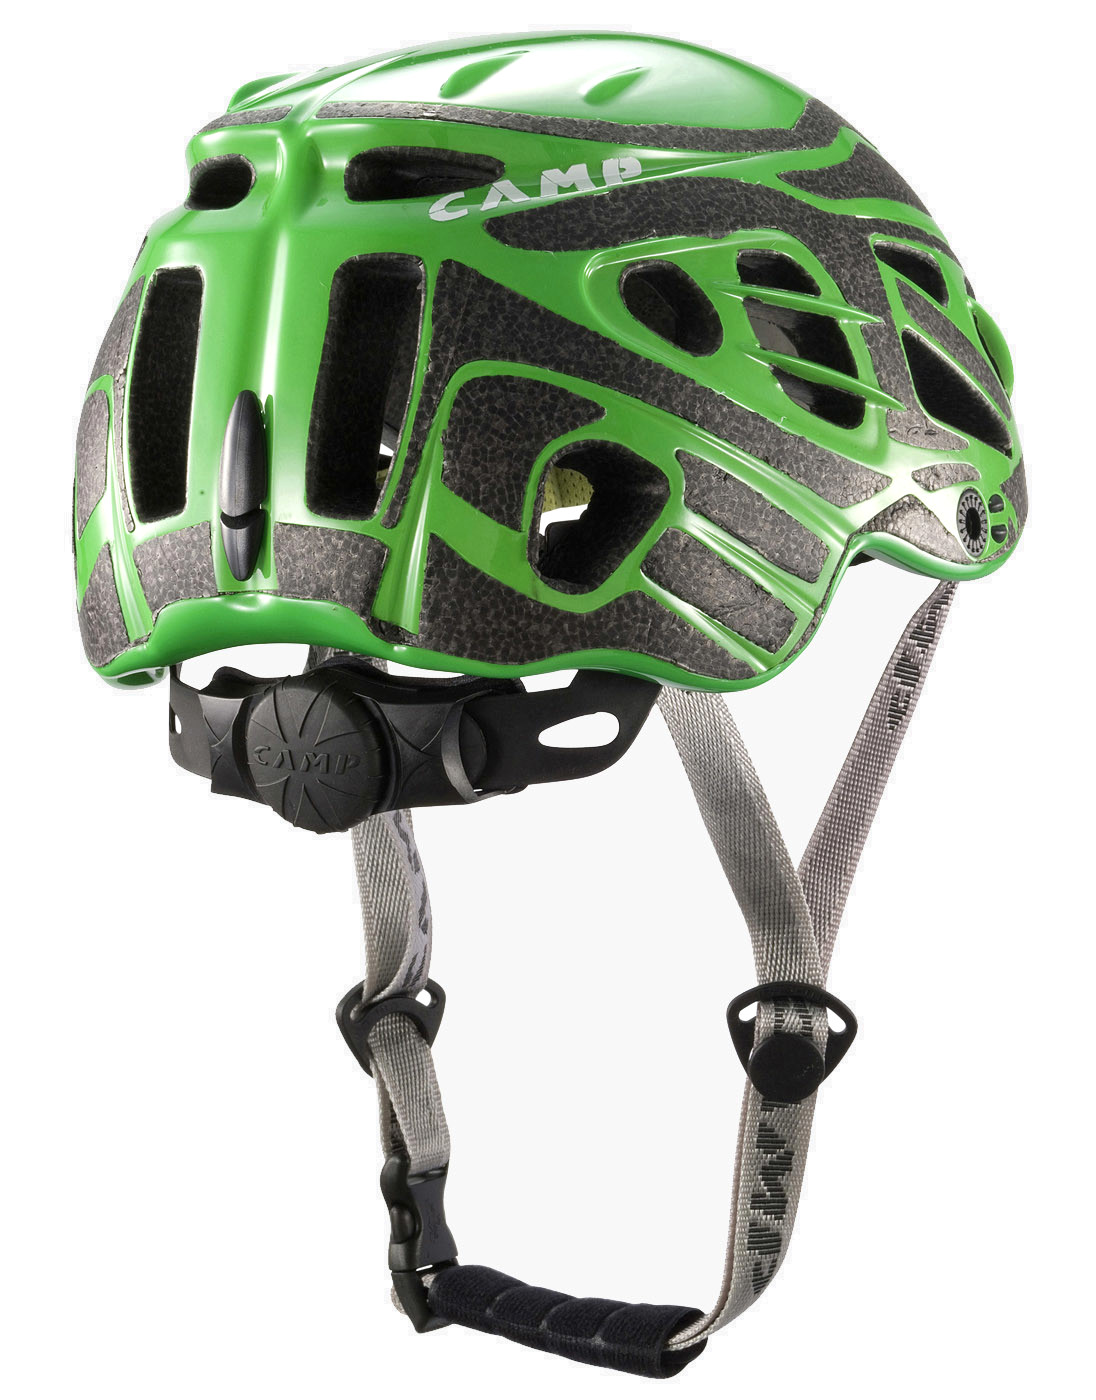 Helmet Speed by CAMP (colour: green)